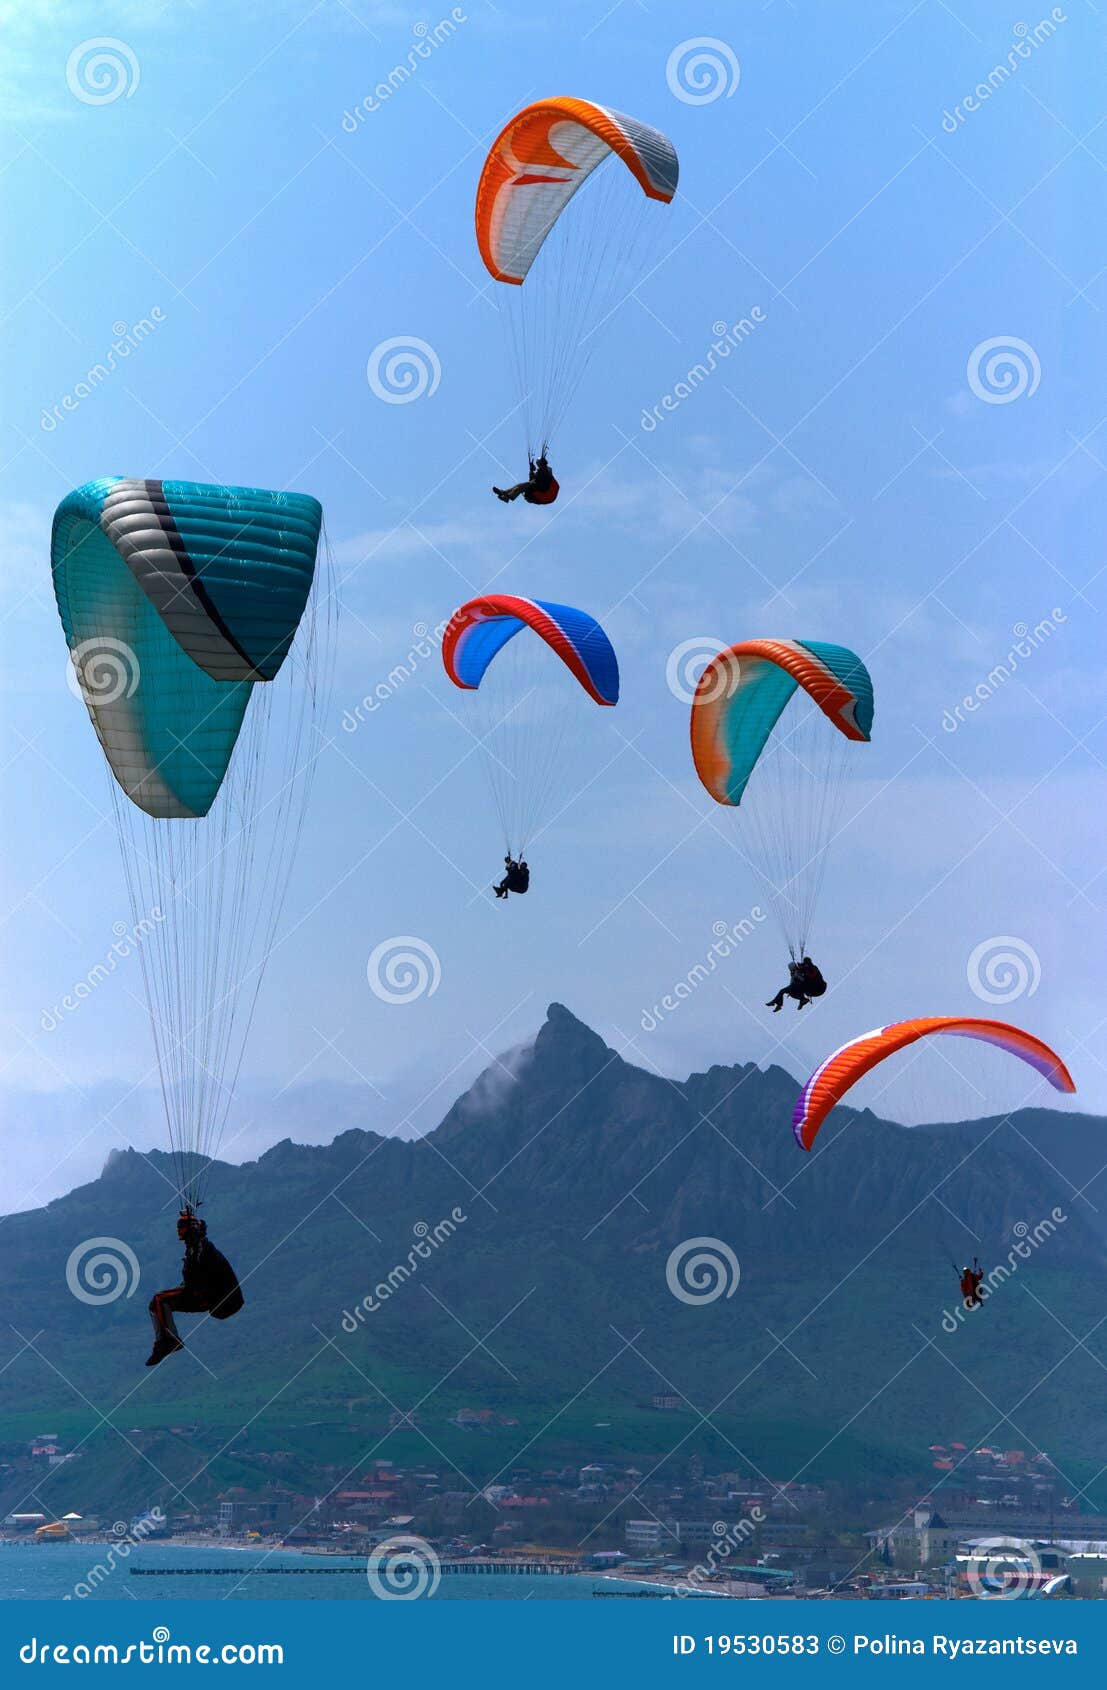 para gliders soaring over the mountains